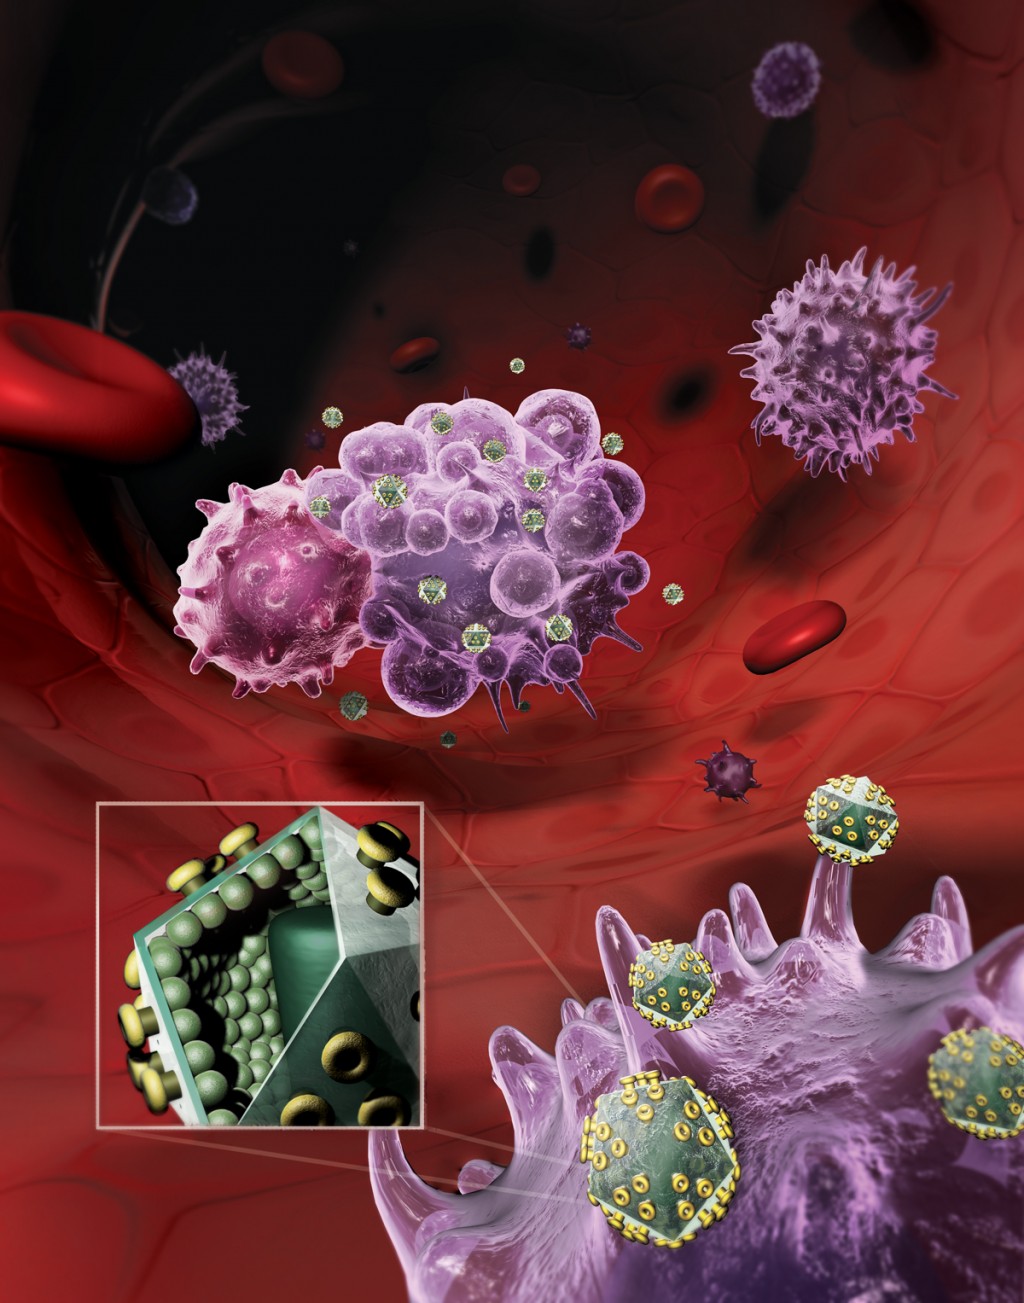 Color illustration. 2D still rendered from a 3D scene. Depicts HIV virus eliminating t cells by inducing apoptosis. Scene is inside blood vessel.